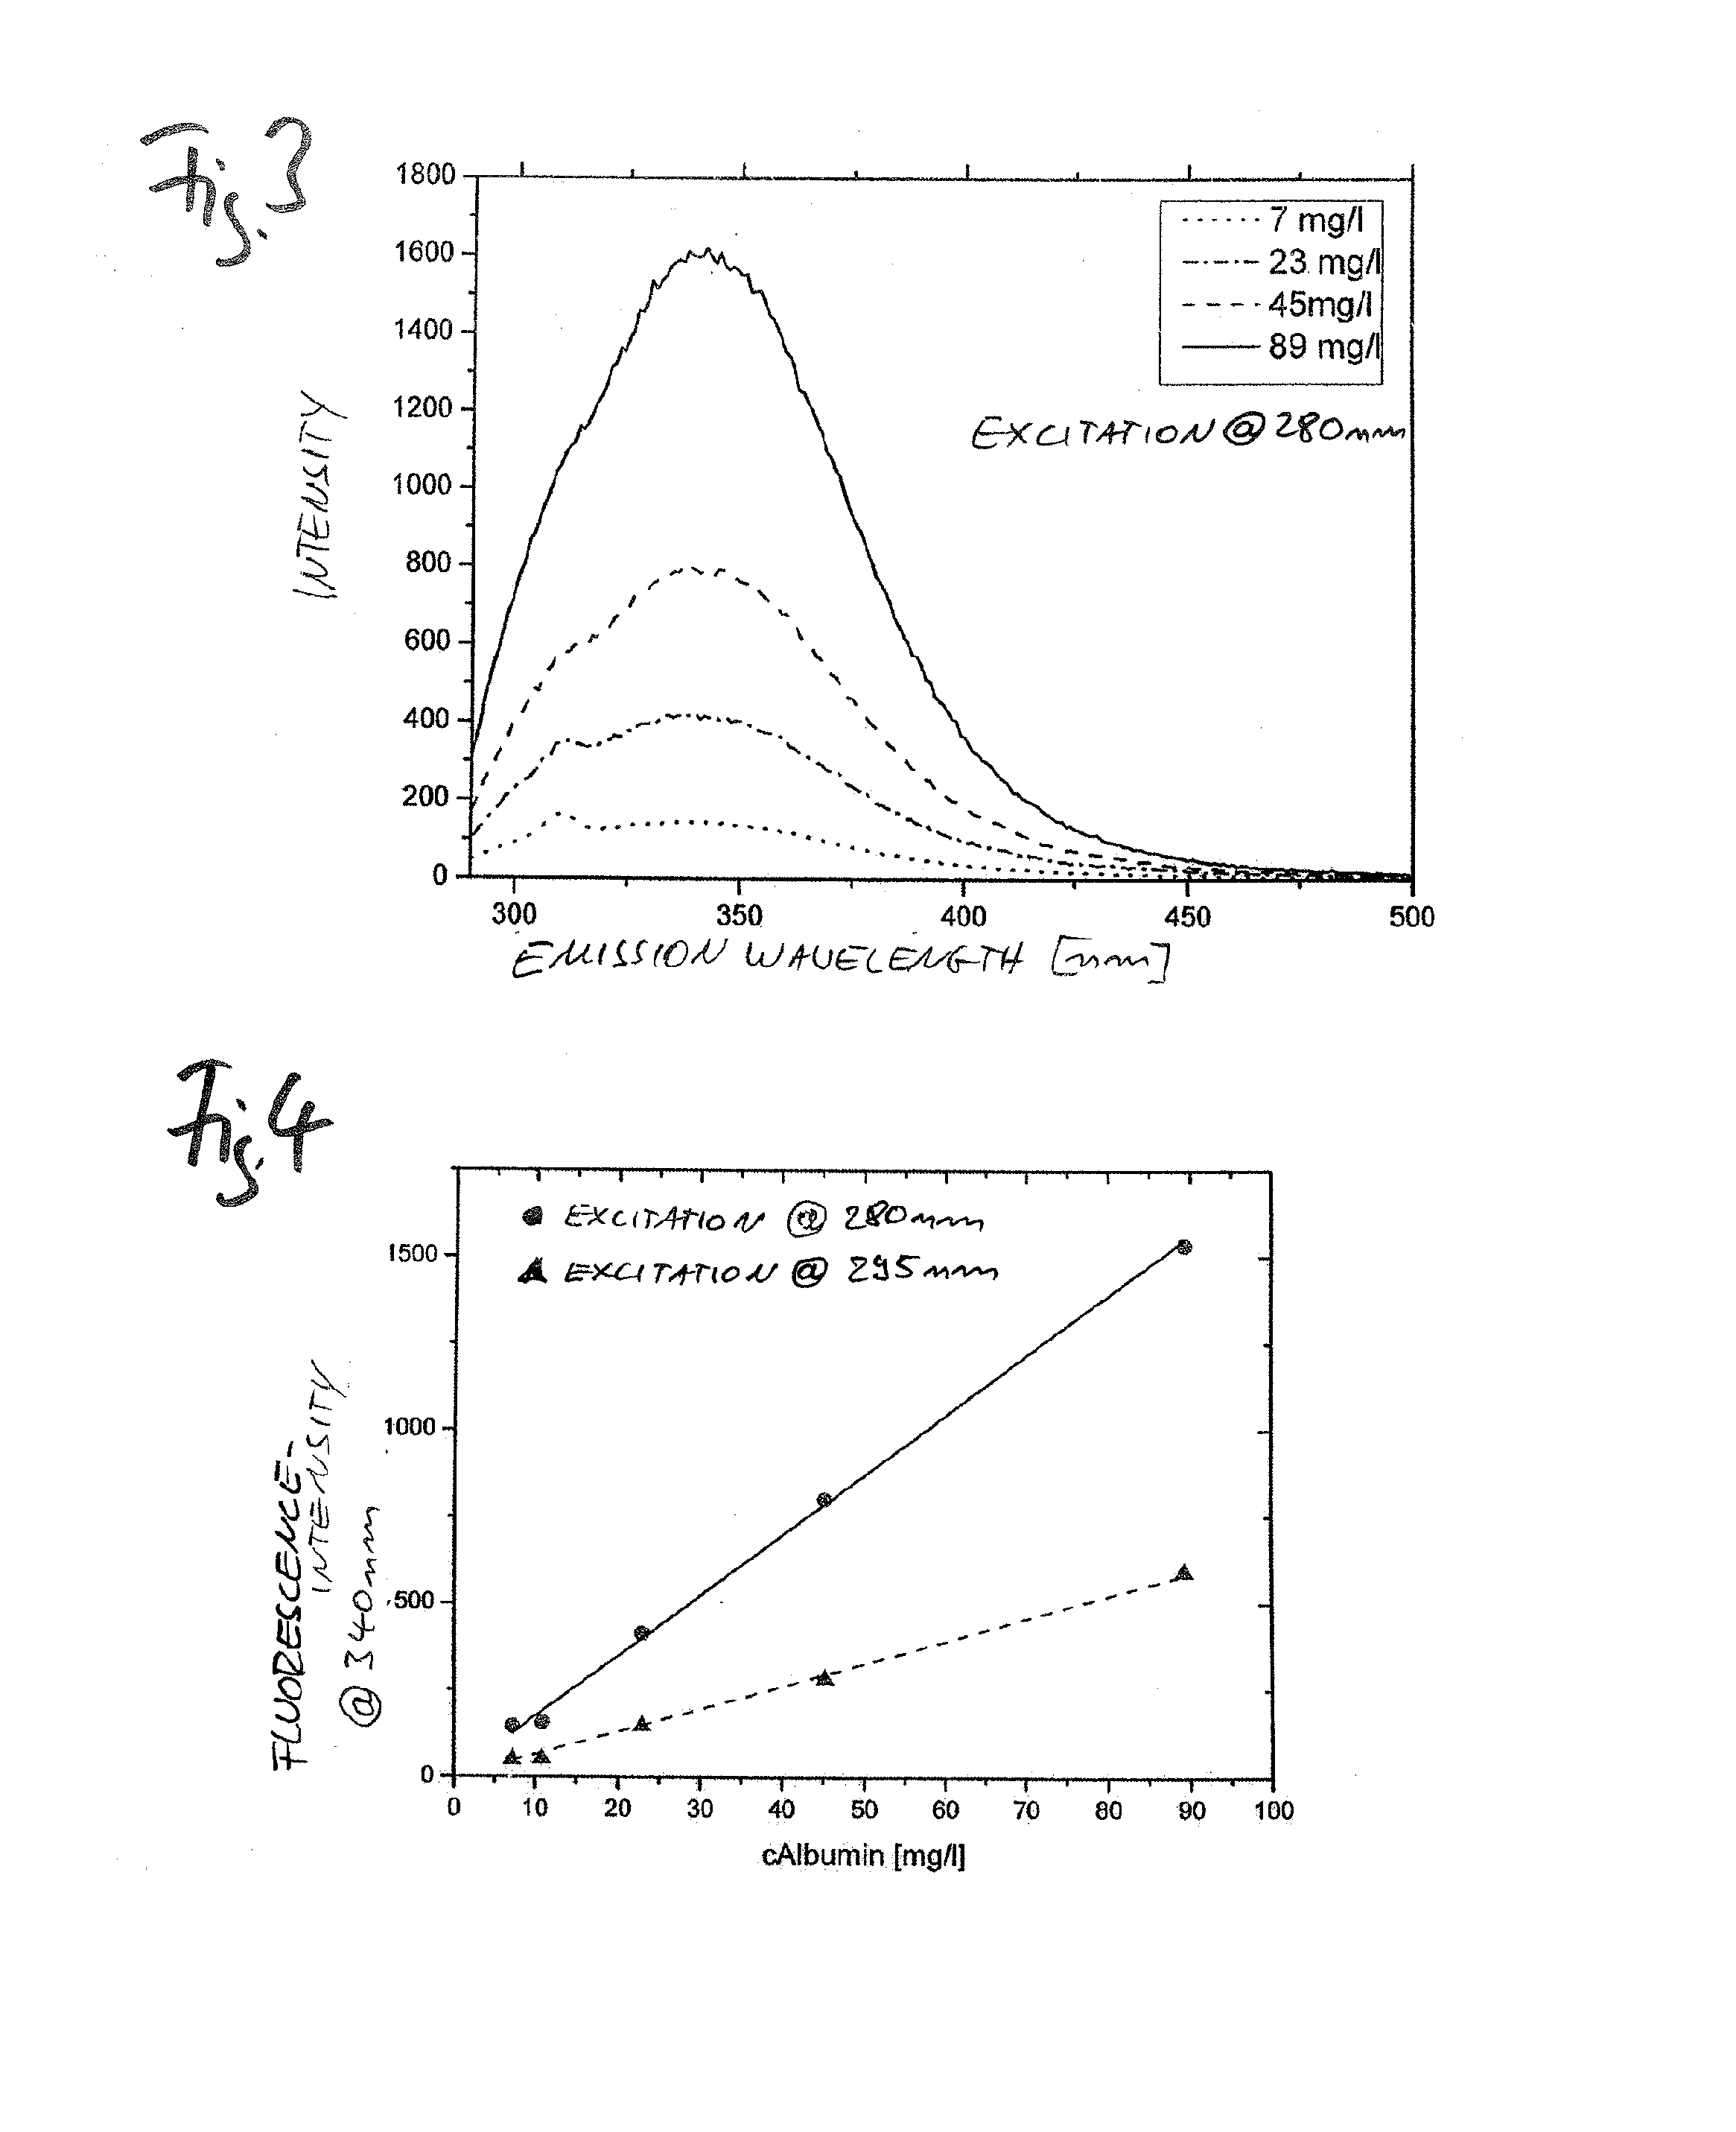 Method and apparatus for monitoring a treatment of a patient, preferably for monitoring hemodialysis, hemodiafiltration, and/or peritoneal dialysis